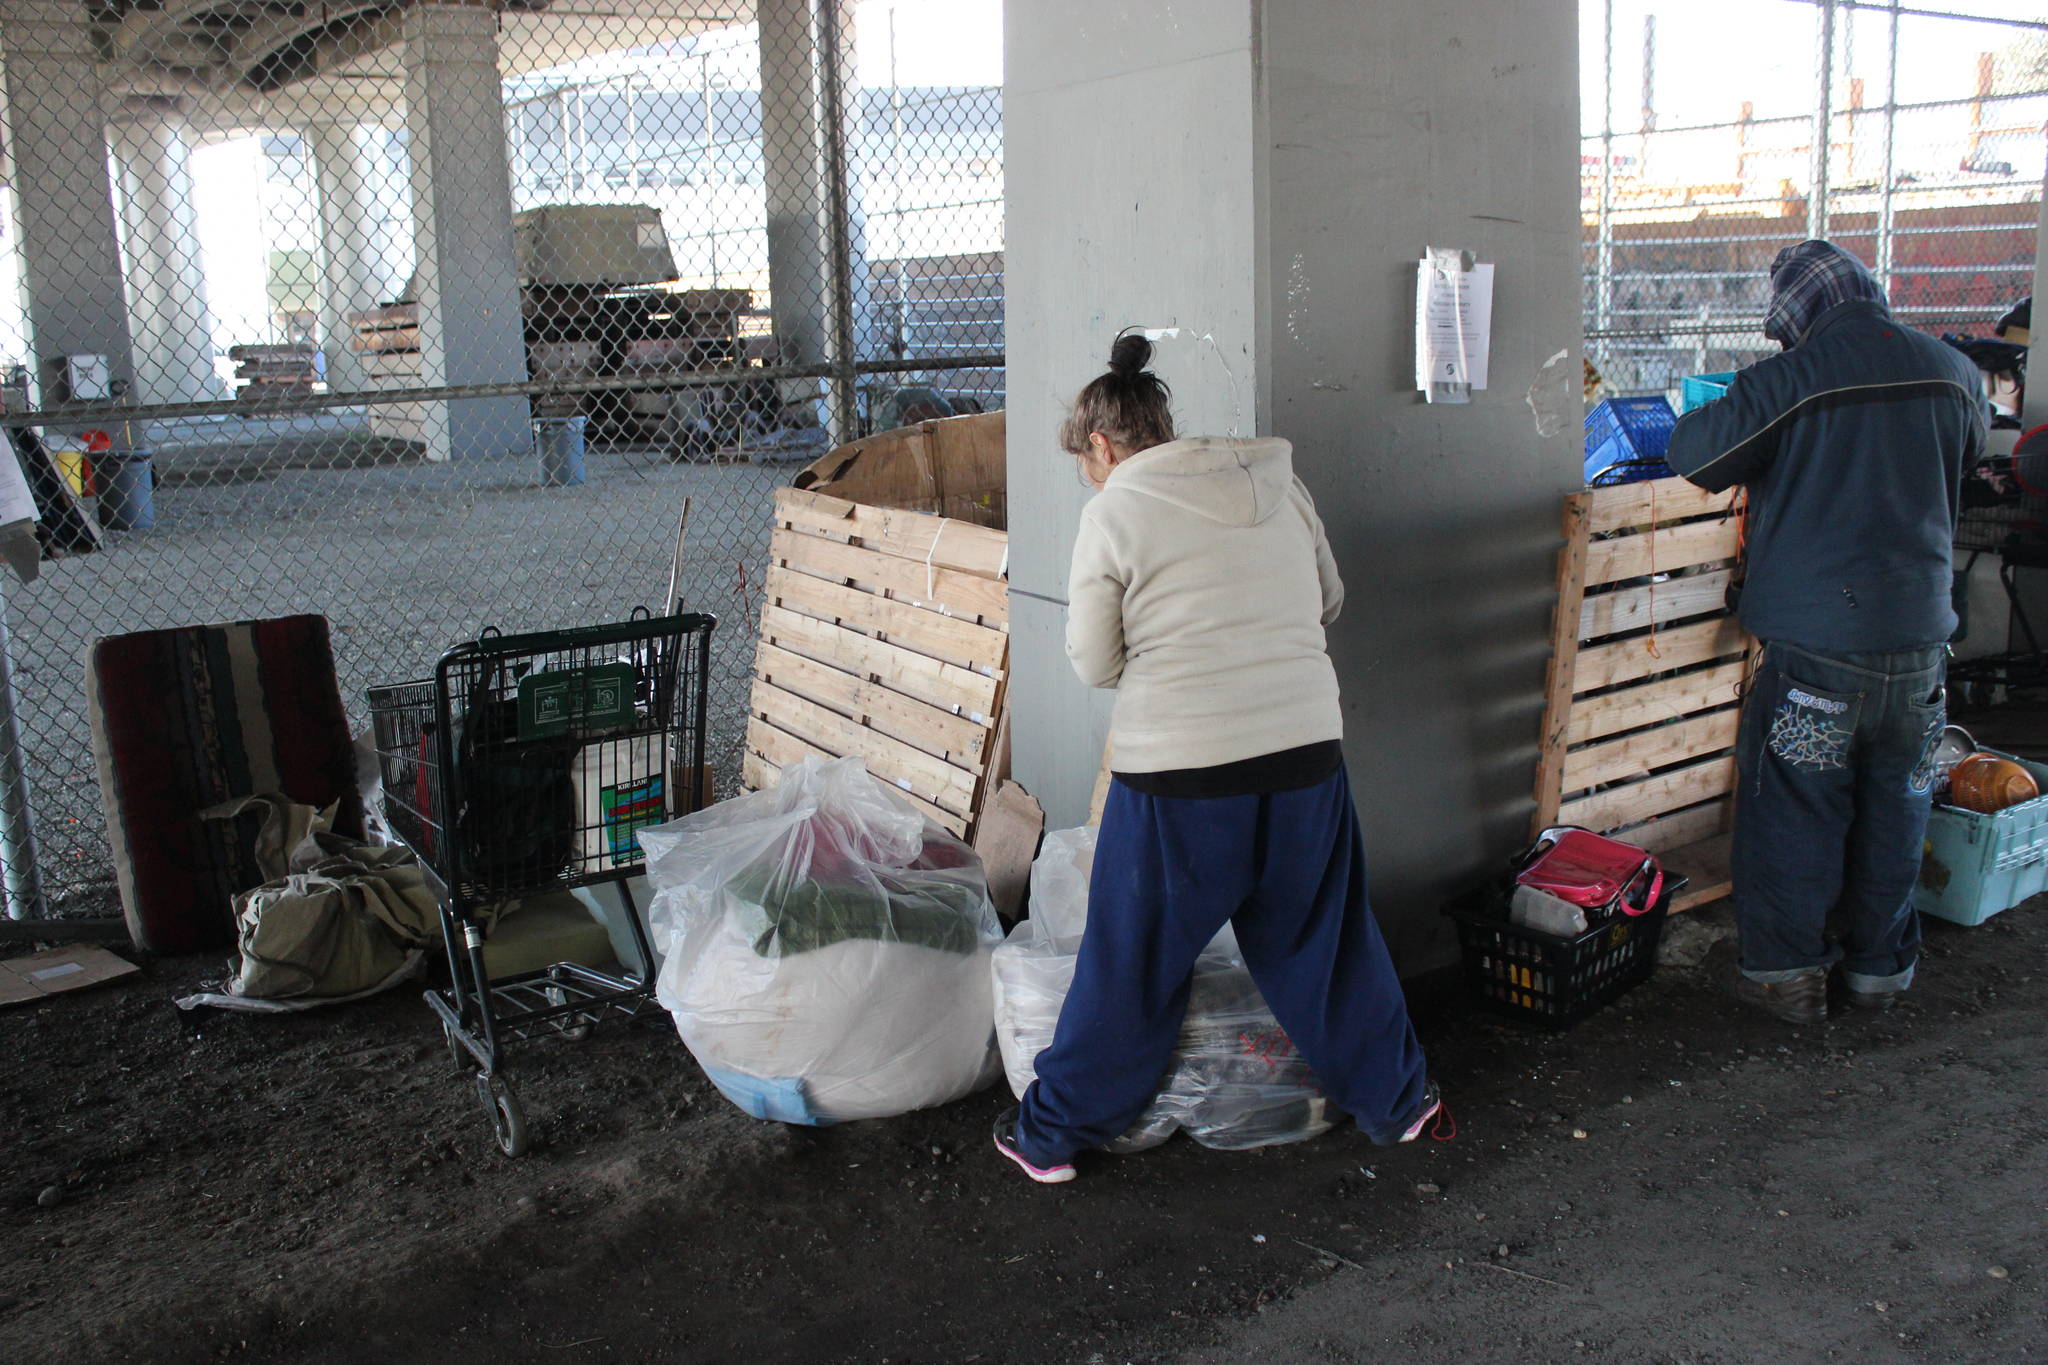 A pair of homeless campers pack up before being evicted from under the Ballard Bridge. Photo by Casey Jaywork.